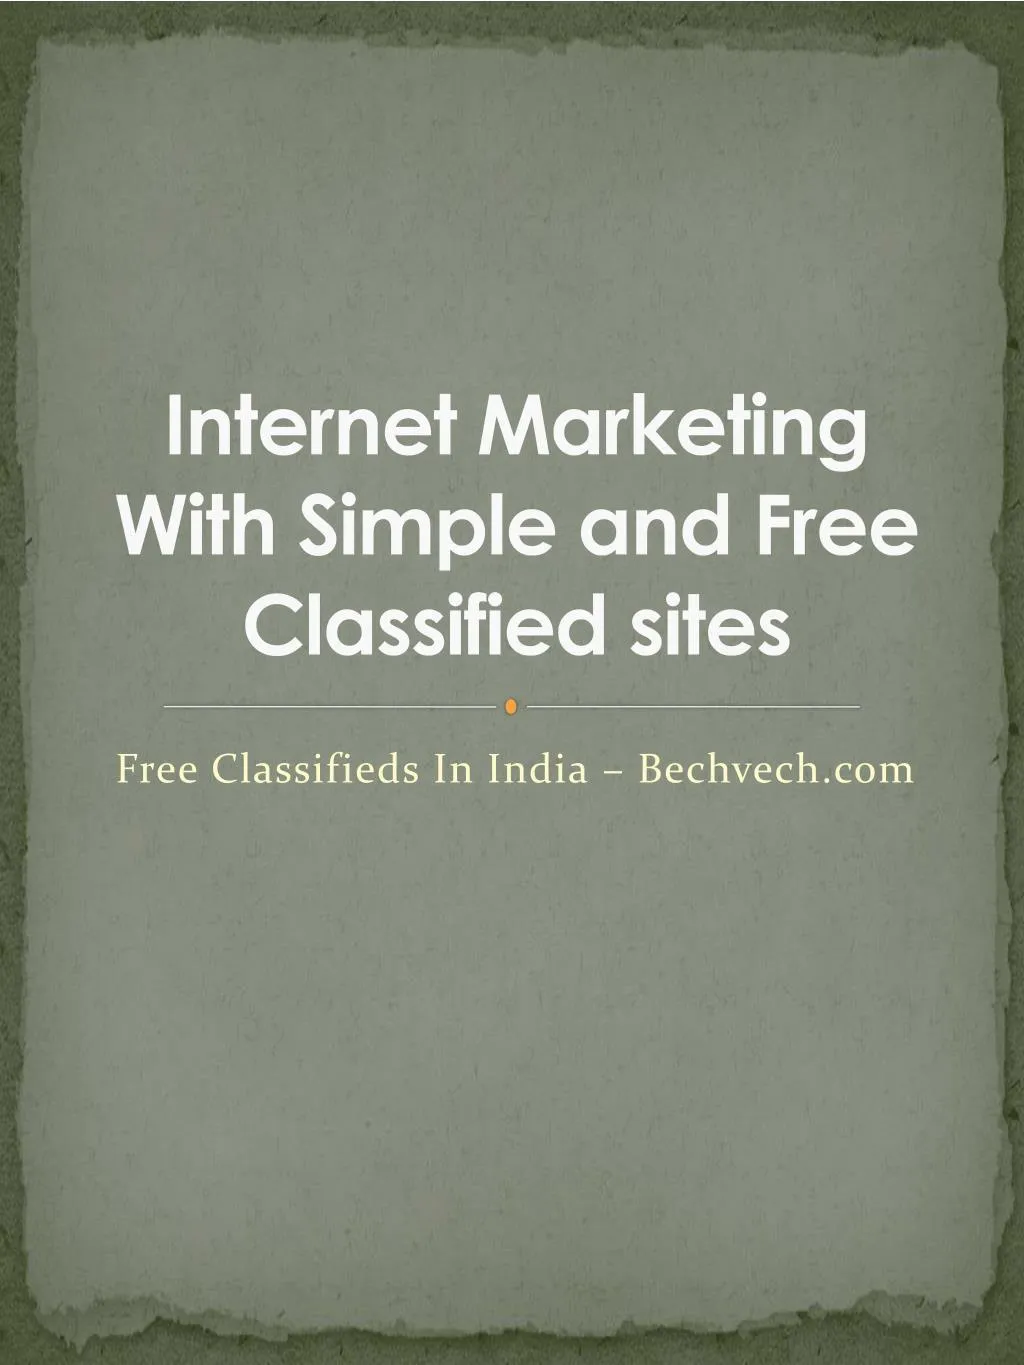 internet marketing with simple and free classified sites